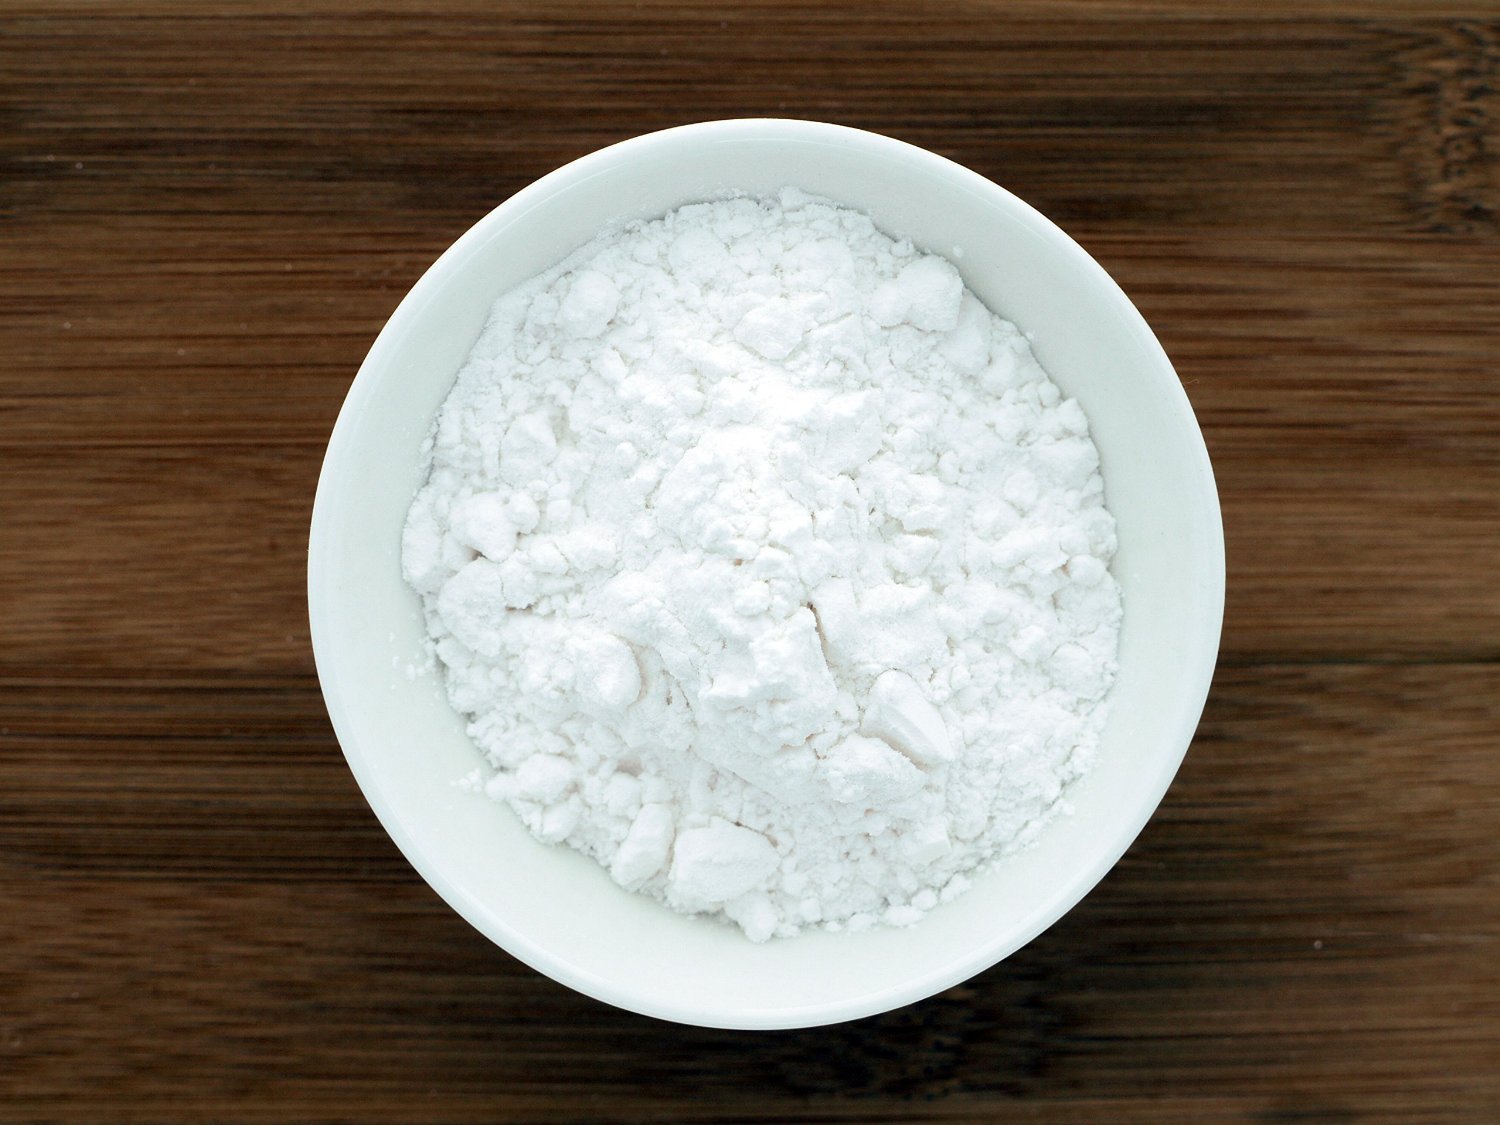 This is an image of a small white bowl containing Tapioca Flour from Anthony's Goods